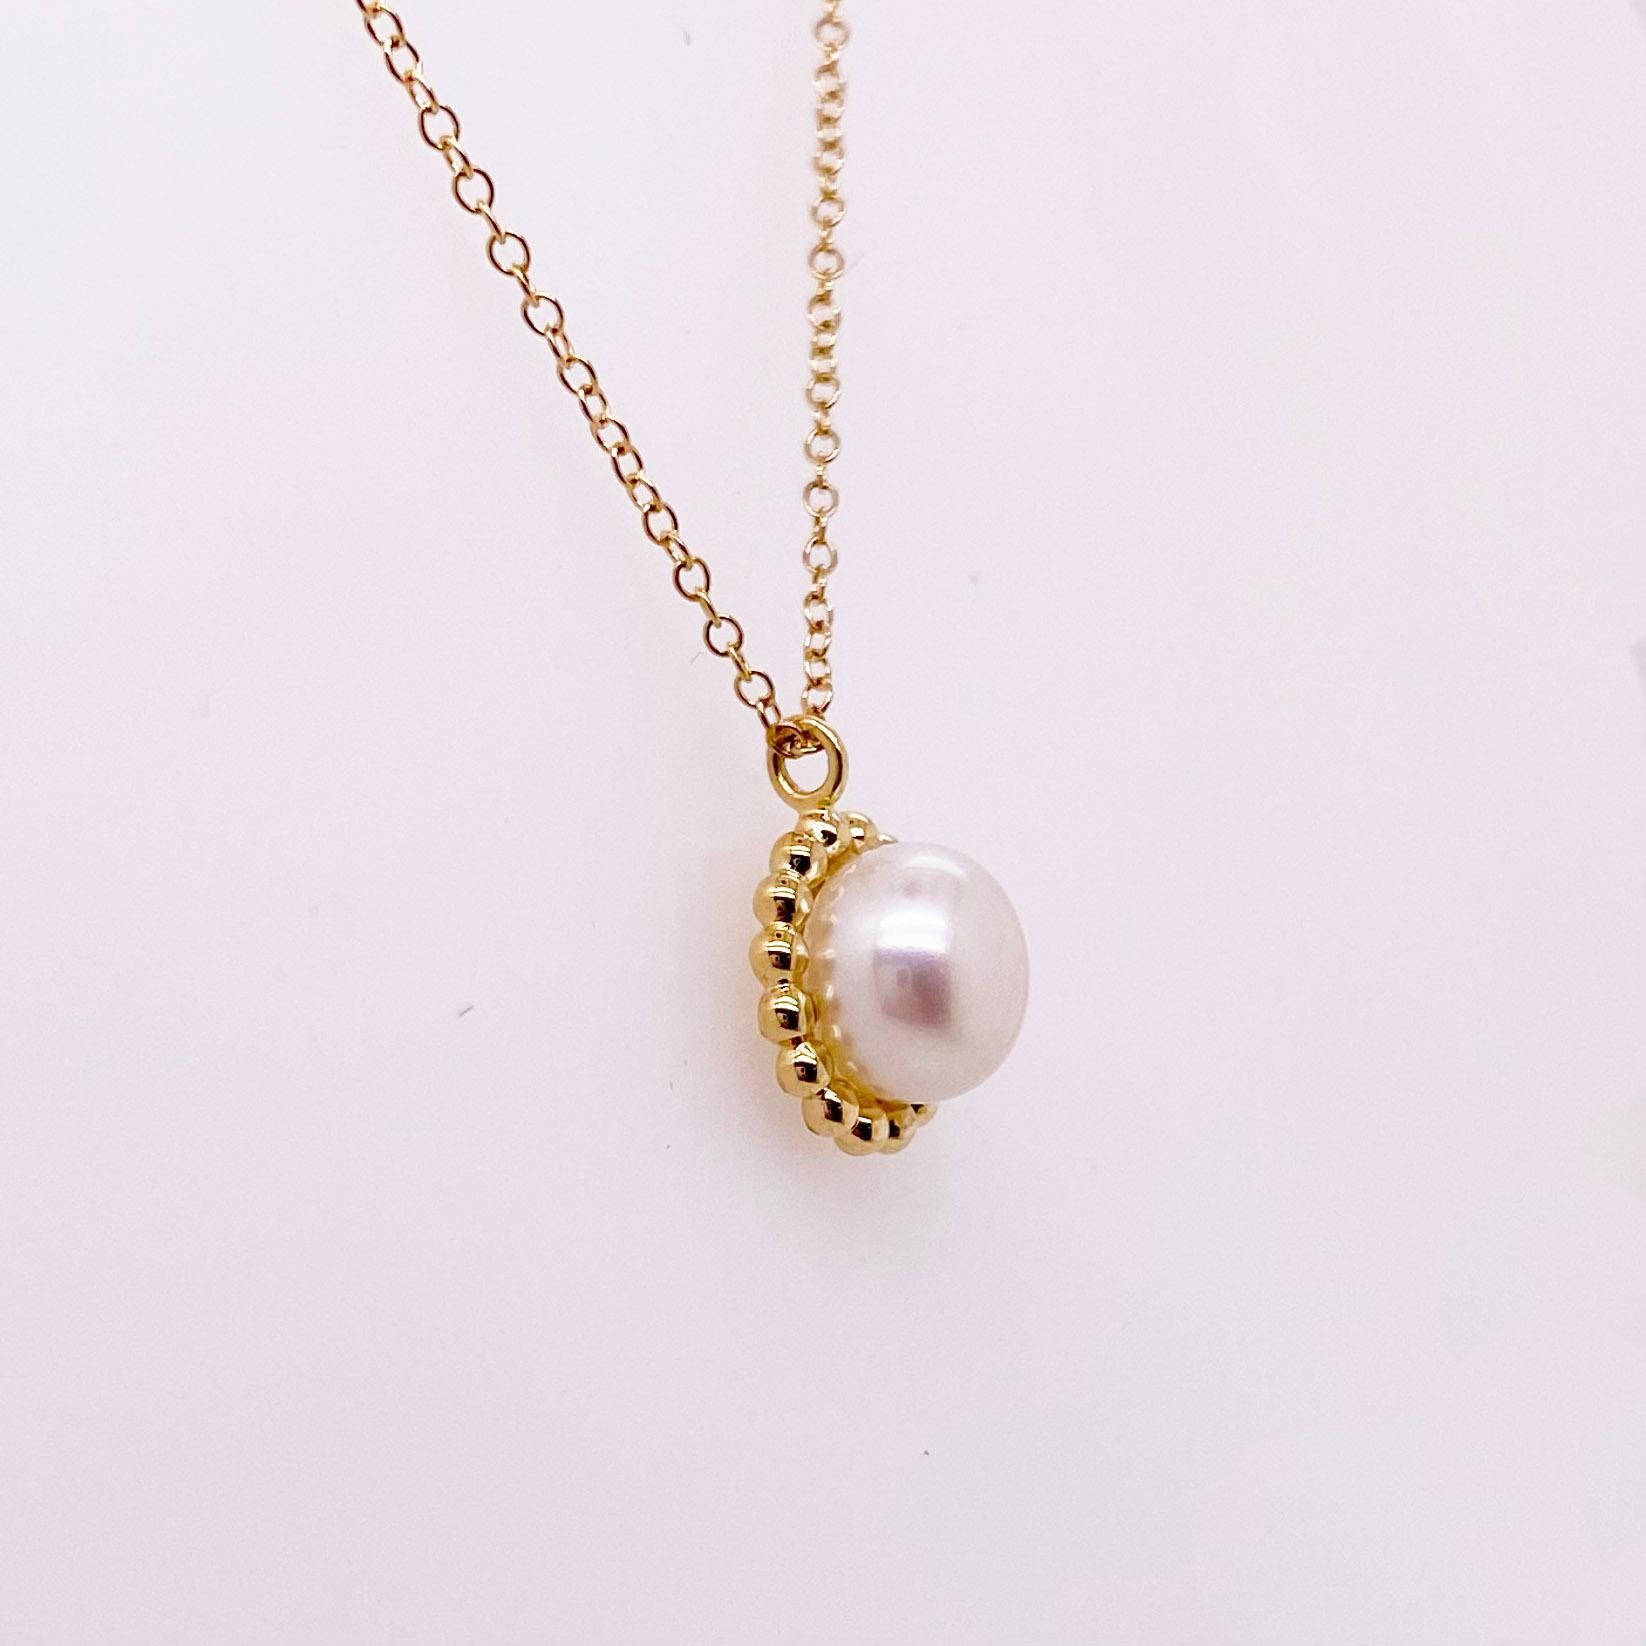 This lovely pearl necklace has a gold beaded frame around it.  It also matches a ring and earring set that we have listed on 1stDibs.  The necklace is stunning with one genuine cultured pearl in the center.  The chain has three setting so that you